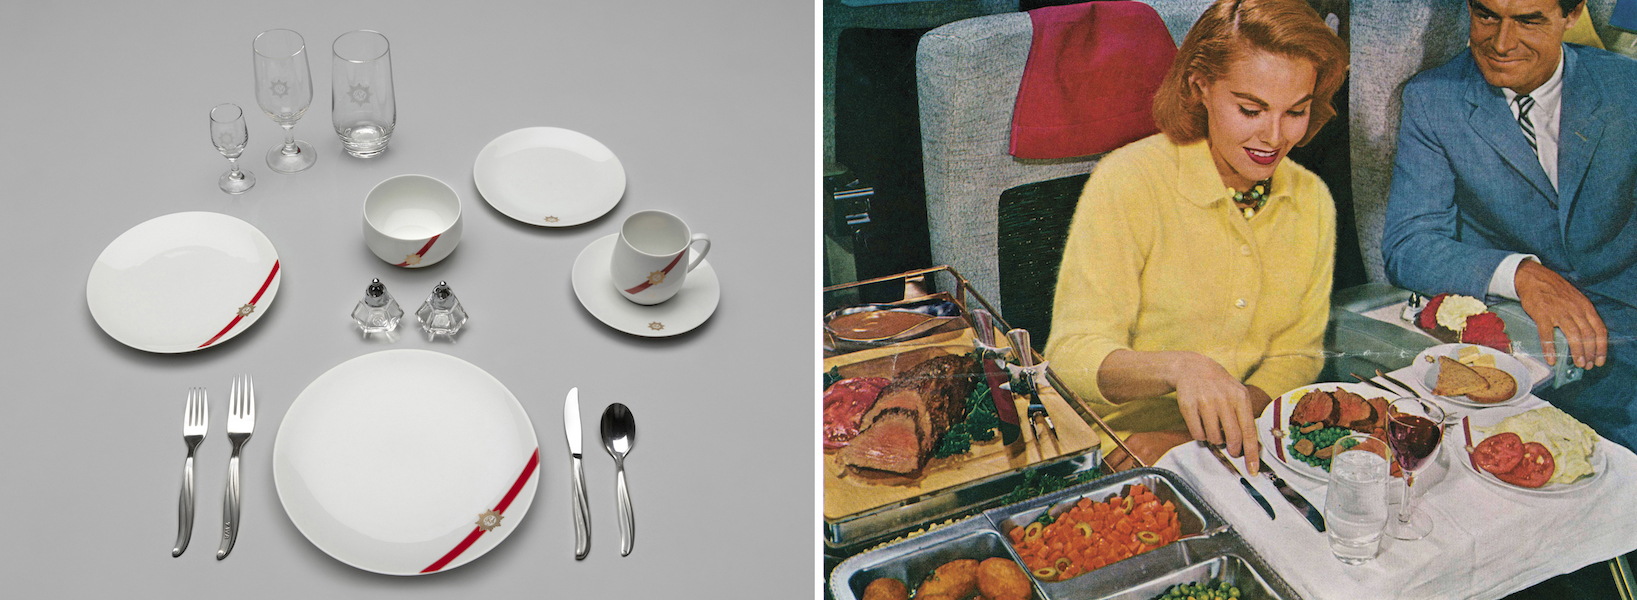 Left, TWA (Trans World Airlines) Royal Ambassador first-class meal service set, 1960s–mid-1970s. Rosenthal China, Germany; International Silver Co., Meriden, Connecticut, ceramic, glass, metal. Collection of SFO Museum. Plates, bowl, fork, knife, and spoon: gift of TWA Clipped Wings International. Cordial and wine glass: gift of Linda DeVoe. Salt and pepper shakers: gift of Shari Braun. Fork: gift of Shirley A. Rohe2001.027.001, .003 a b, .012, 2002.113.220, .222, .223, 225, .226, .229, 2007.094.002, .010, 2018.118.047 a b, 2020.044.038, L2022.1101.001–.014; Right, TWA ‘Skyliner’ magazine, June 22, 1961, paper, ink. The State Historical Society of Missouri, Digital Collections, R2022.1105.001 